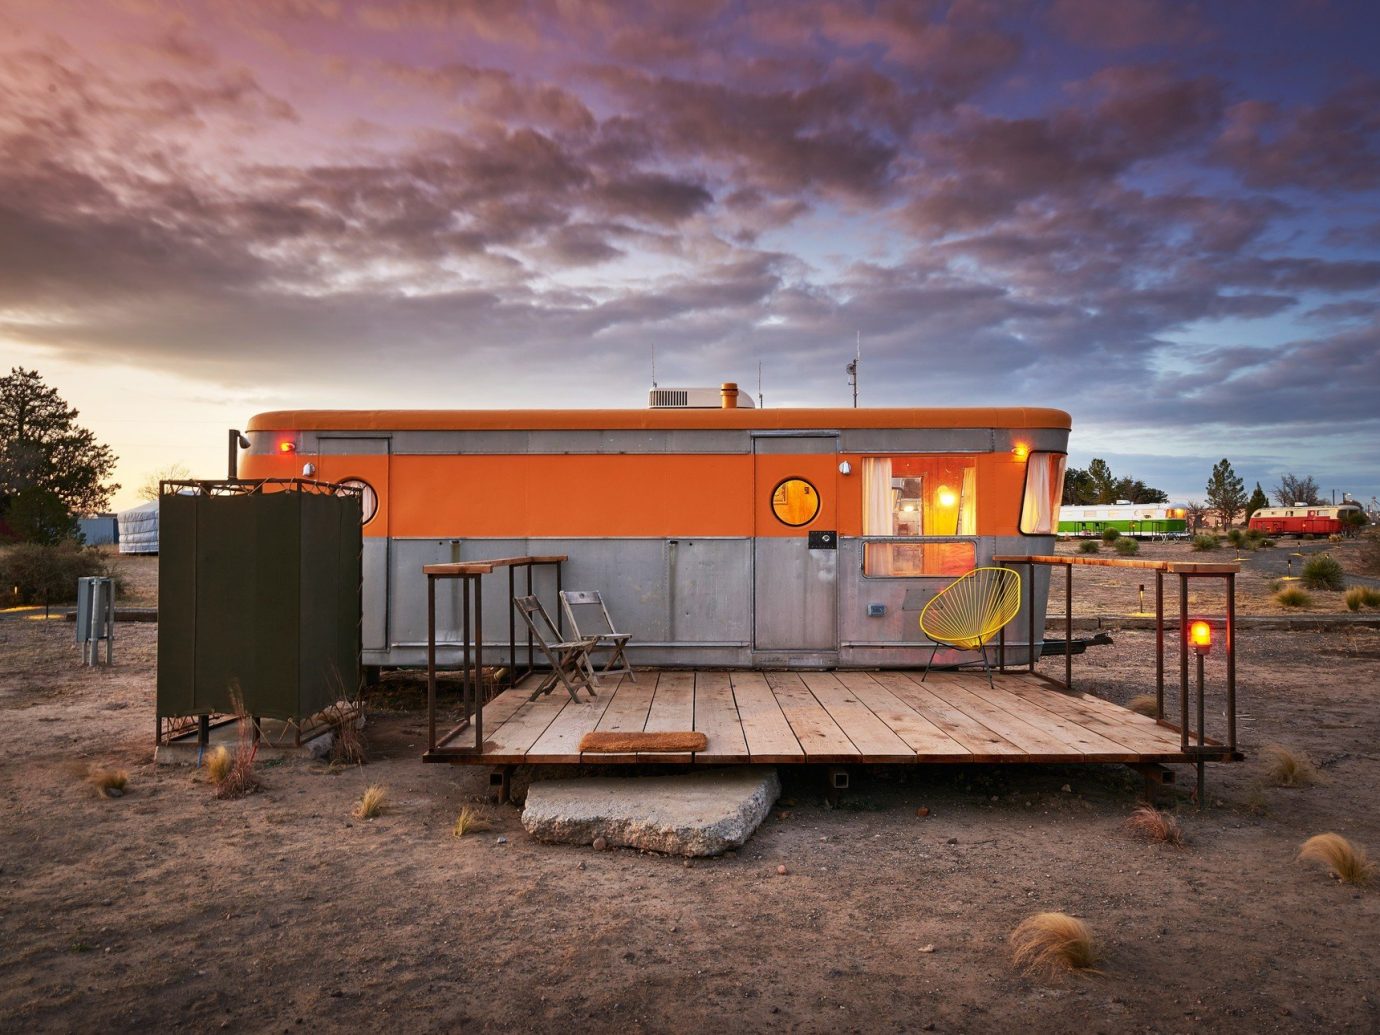 airstream ambient lighting artistic artsy calm dawn dusk Exterior Hip Hotels isolation Patio porch quirky remote serene Solo Travel Terrace trendy Trip Ideas sky ground outdoor transport orange shack cloudy